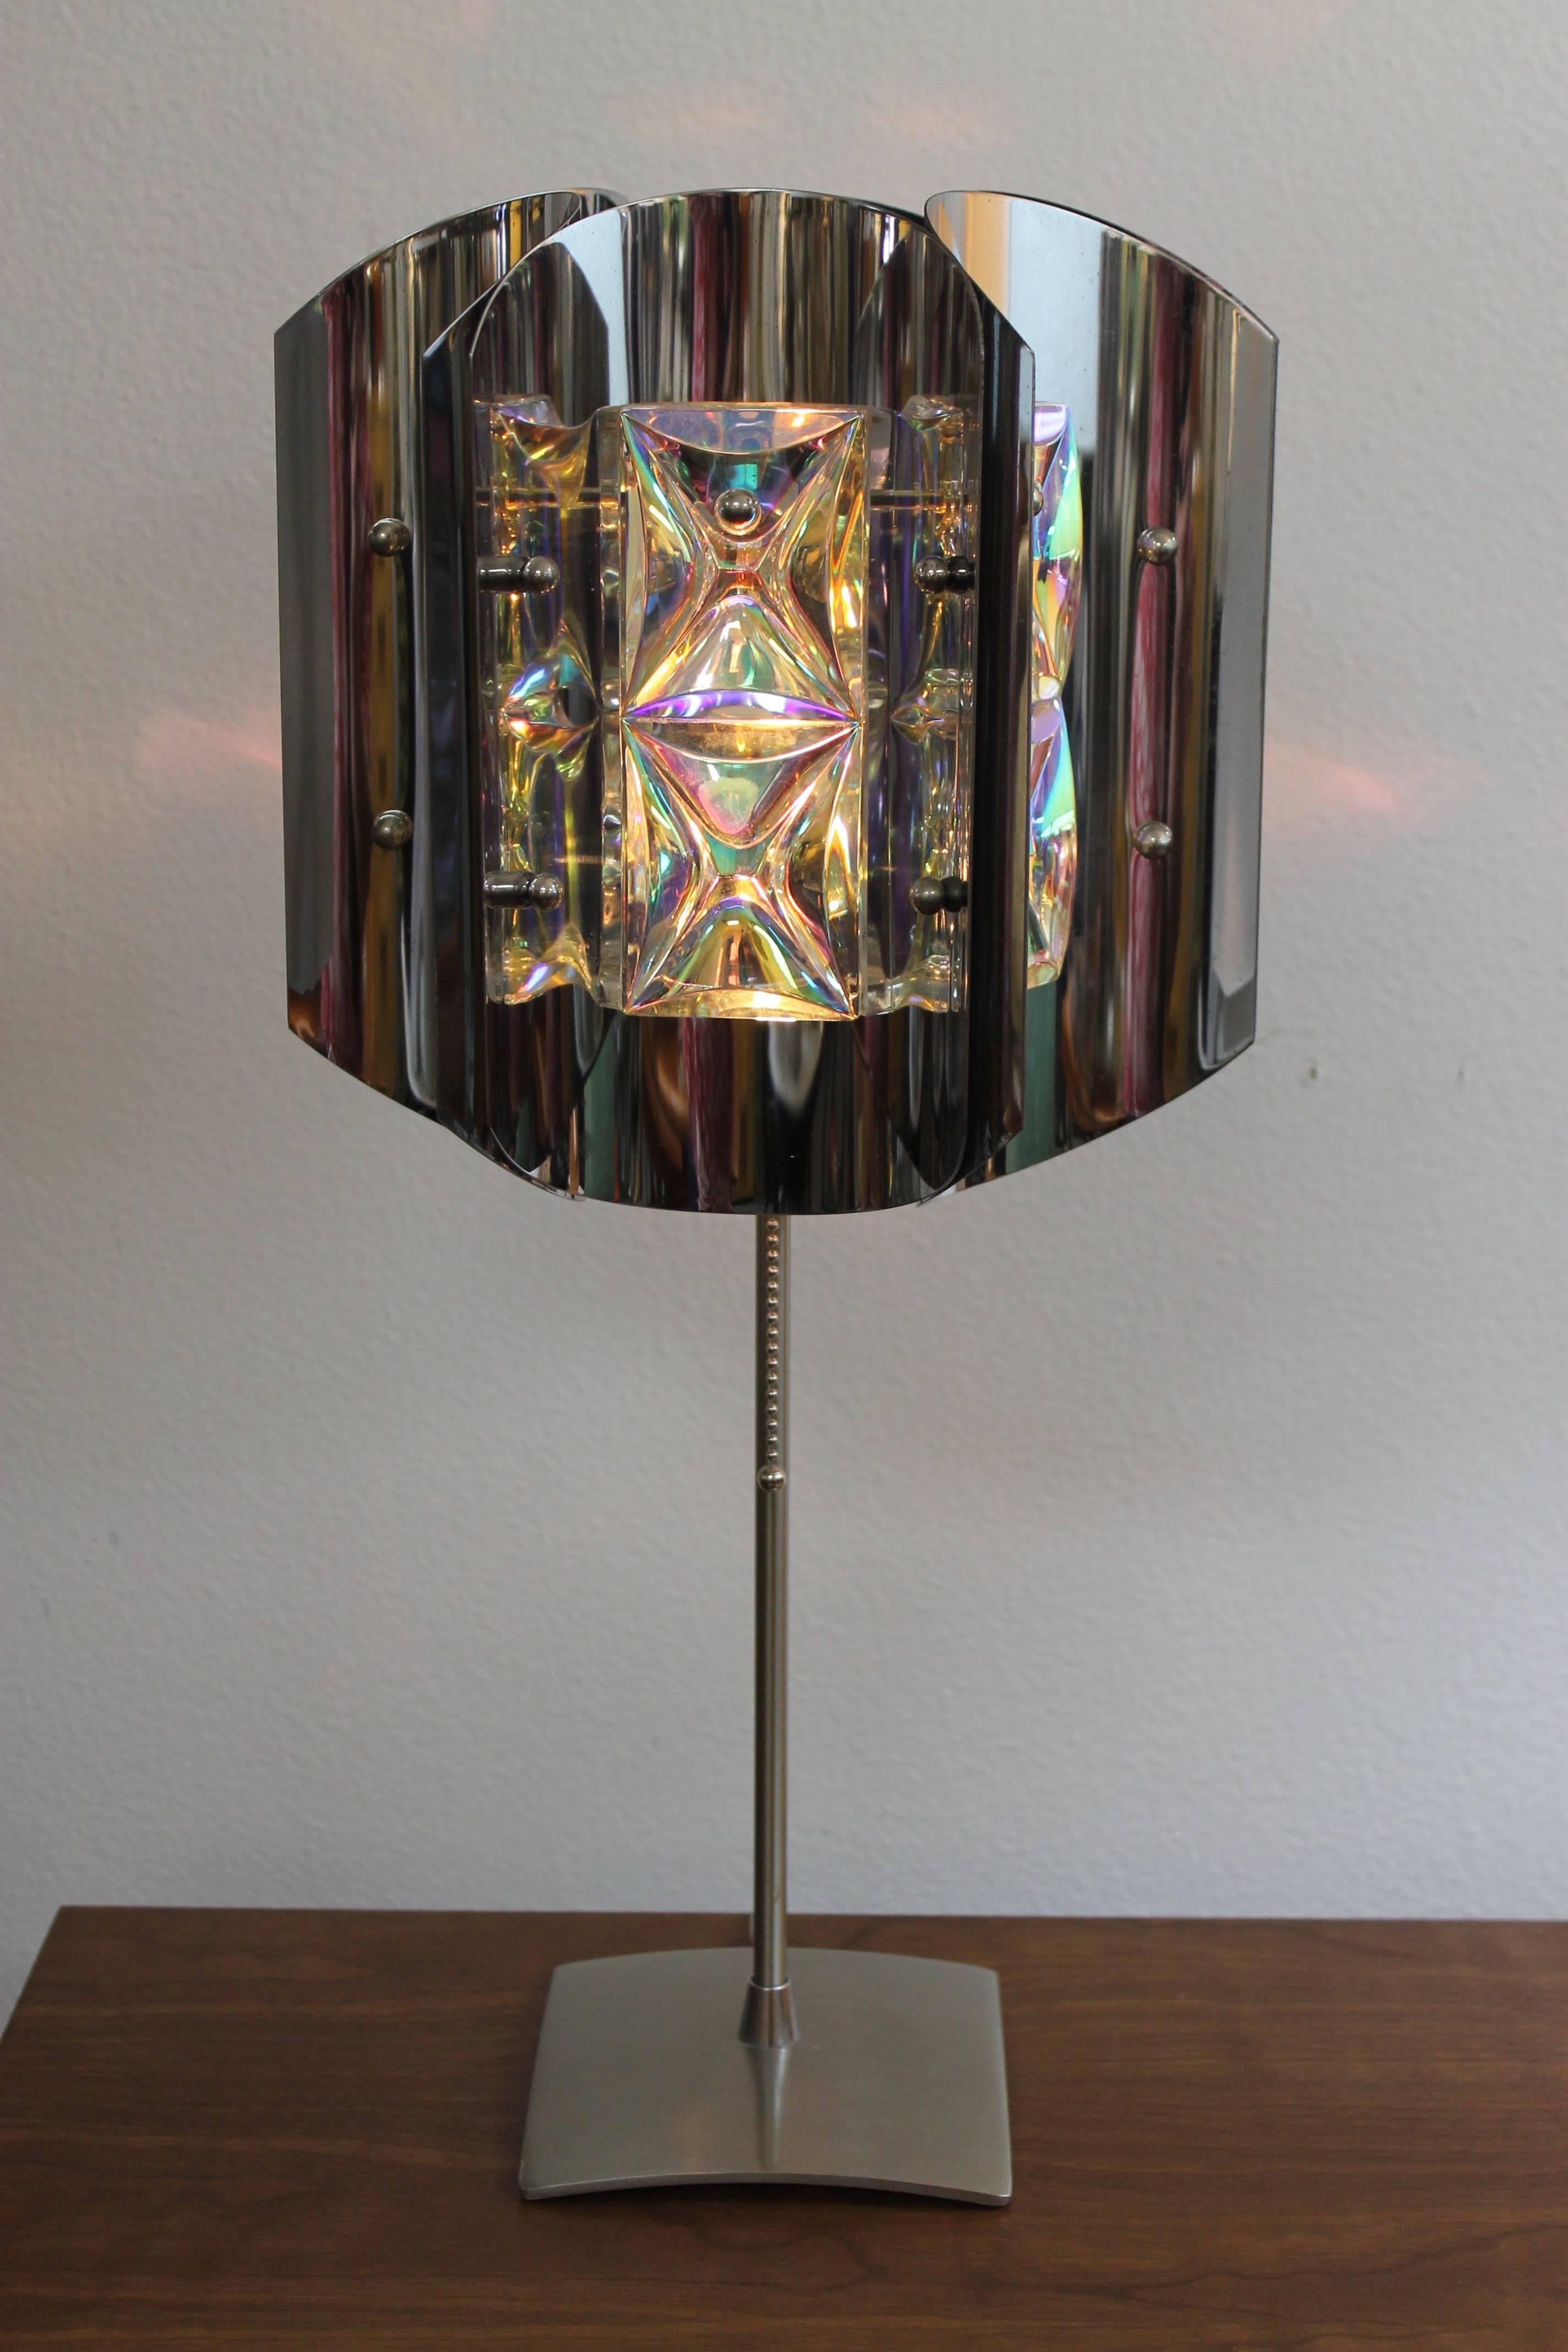 Originally a hanging pendant light, this chrome fixture has been re-purposed as a table lamp with a contemporary Italian base. The shade is circa 1970s, and features iridescent optical crystals that reflect a myriad of colors within the concave